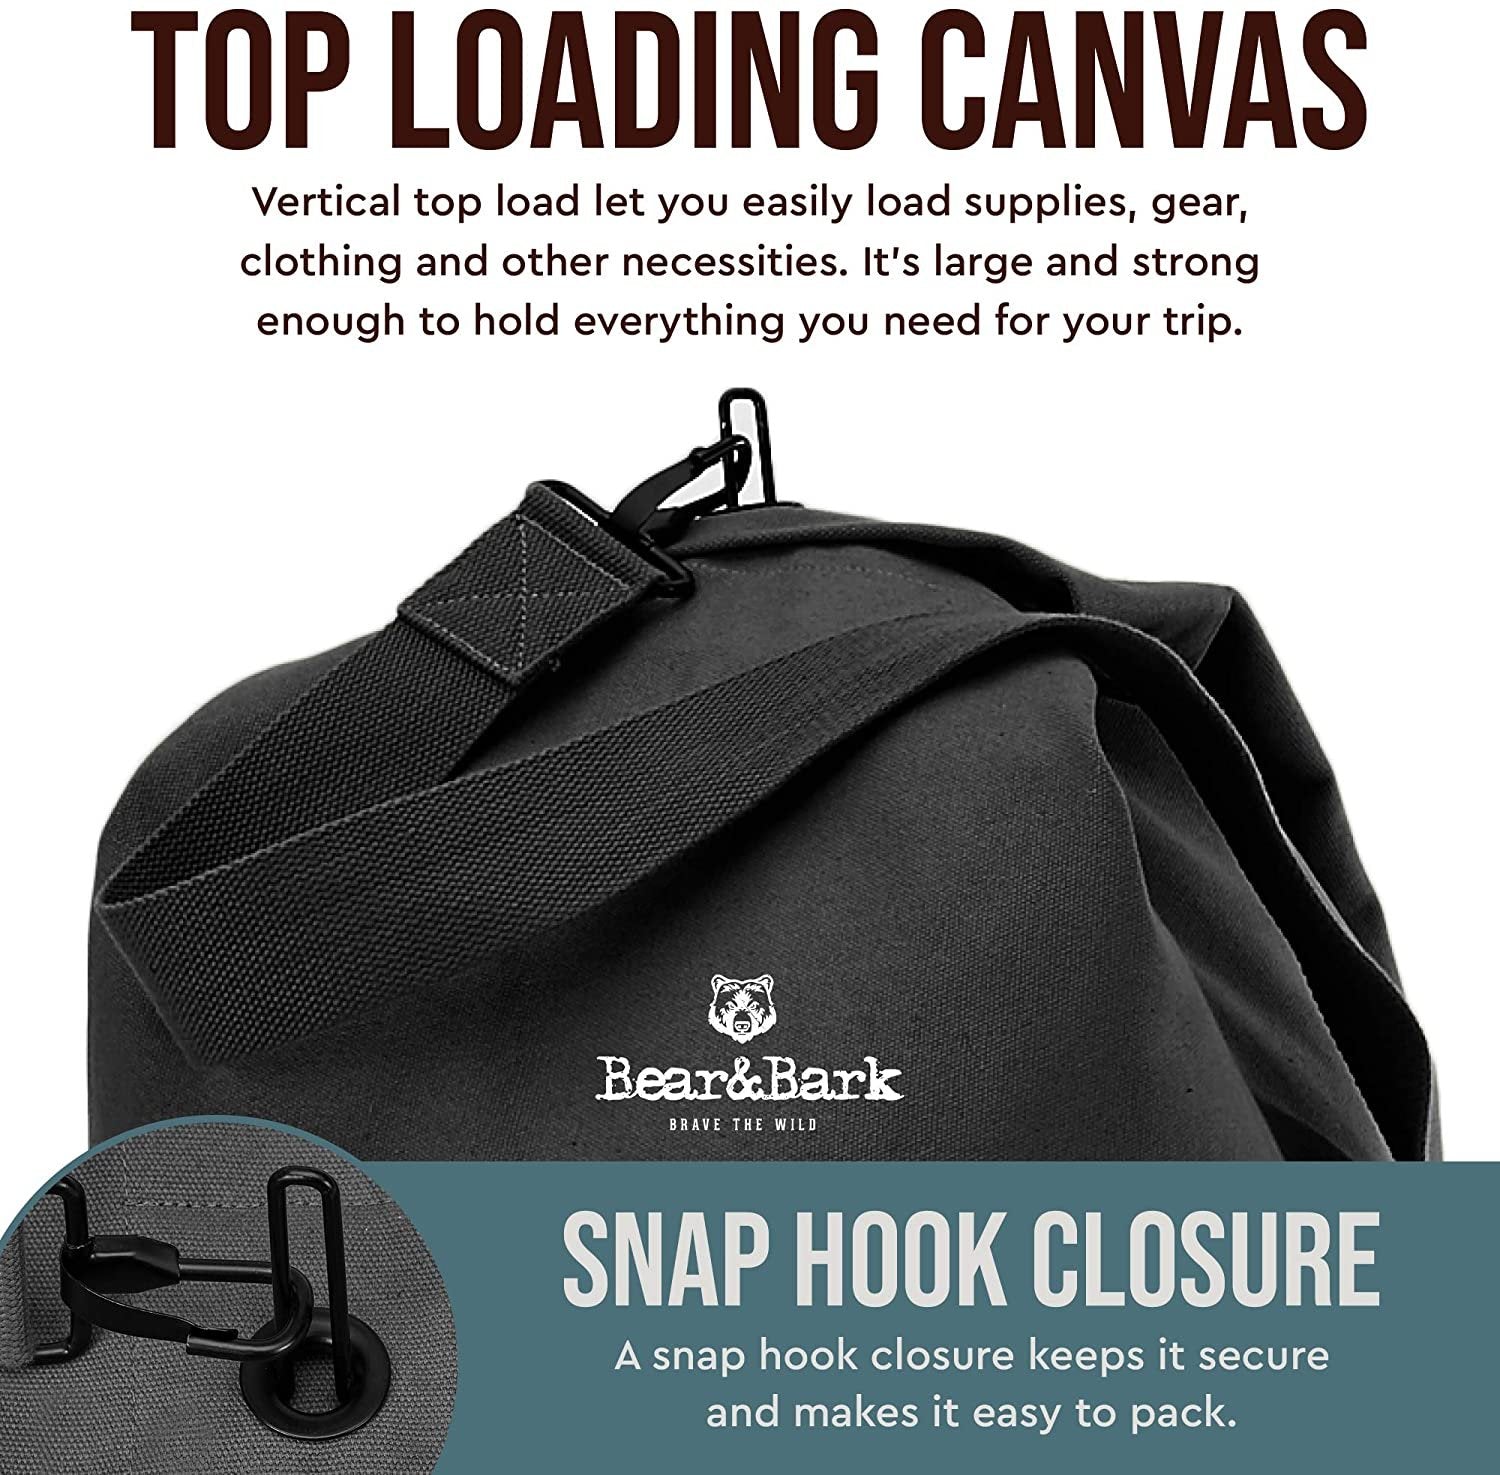 Top Loader Canvas Duffel Bag - Black 56"x32" - Military and Army Cargo Style Carryall Duffel for Men and Woman